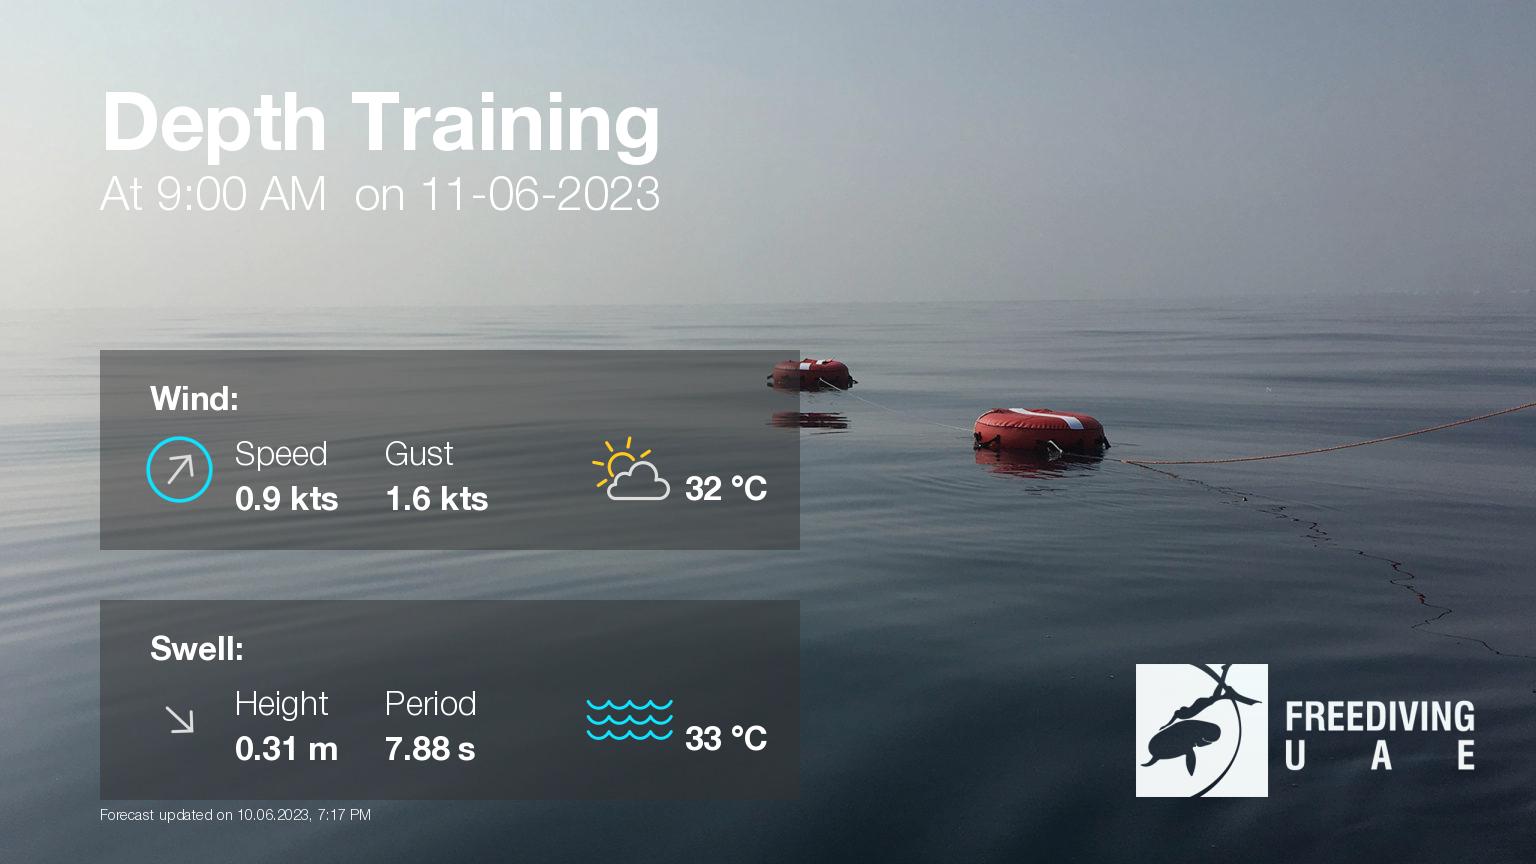 Expected weather during Depth Training on Sun, Jun 11, at 9:00 AM